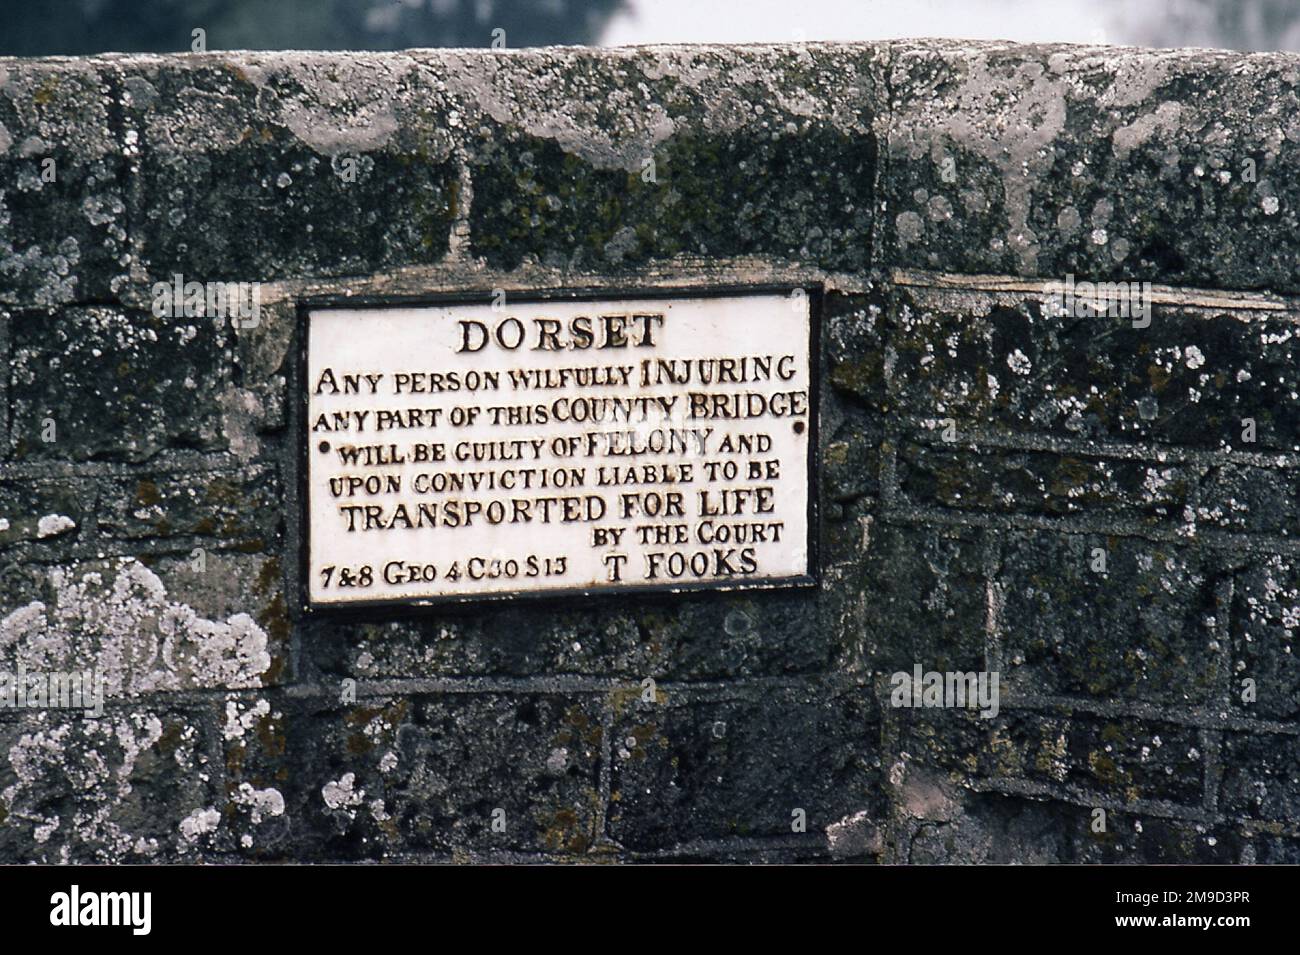 Sign warning of transportation for life as penalty for criminal damage, dating from reign of King George IV of England, 1820-1830, on a bridge near Sturminster Newton, Dorset, England. Stock Photo